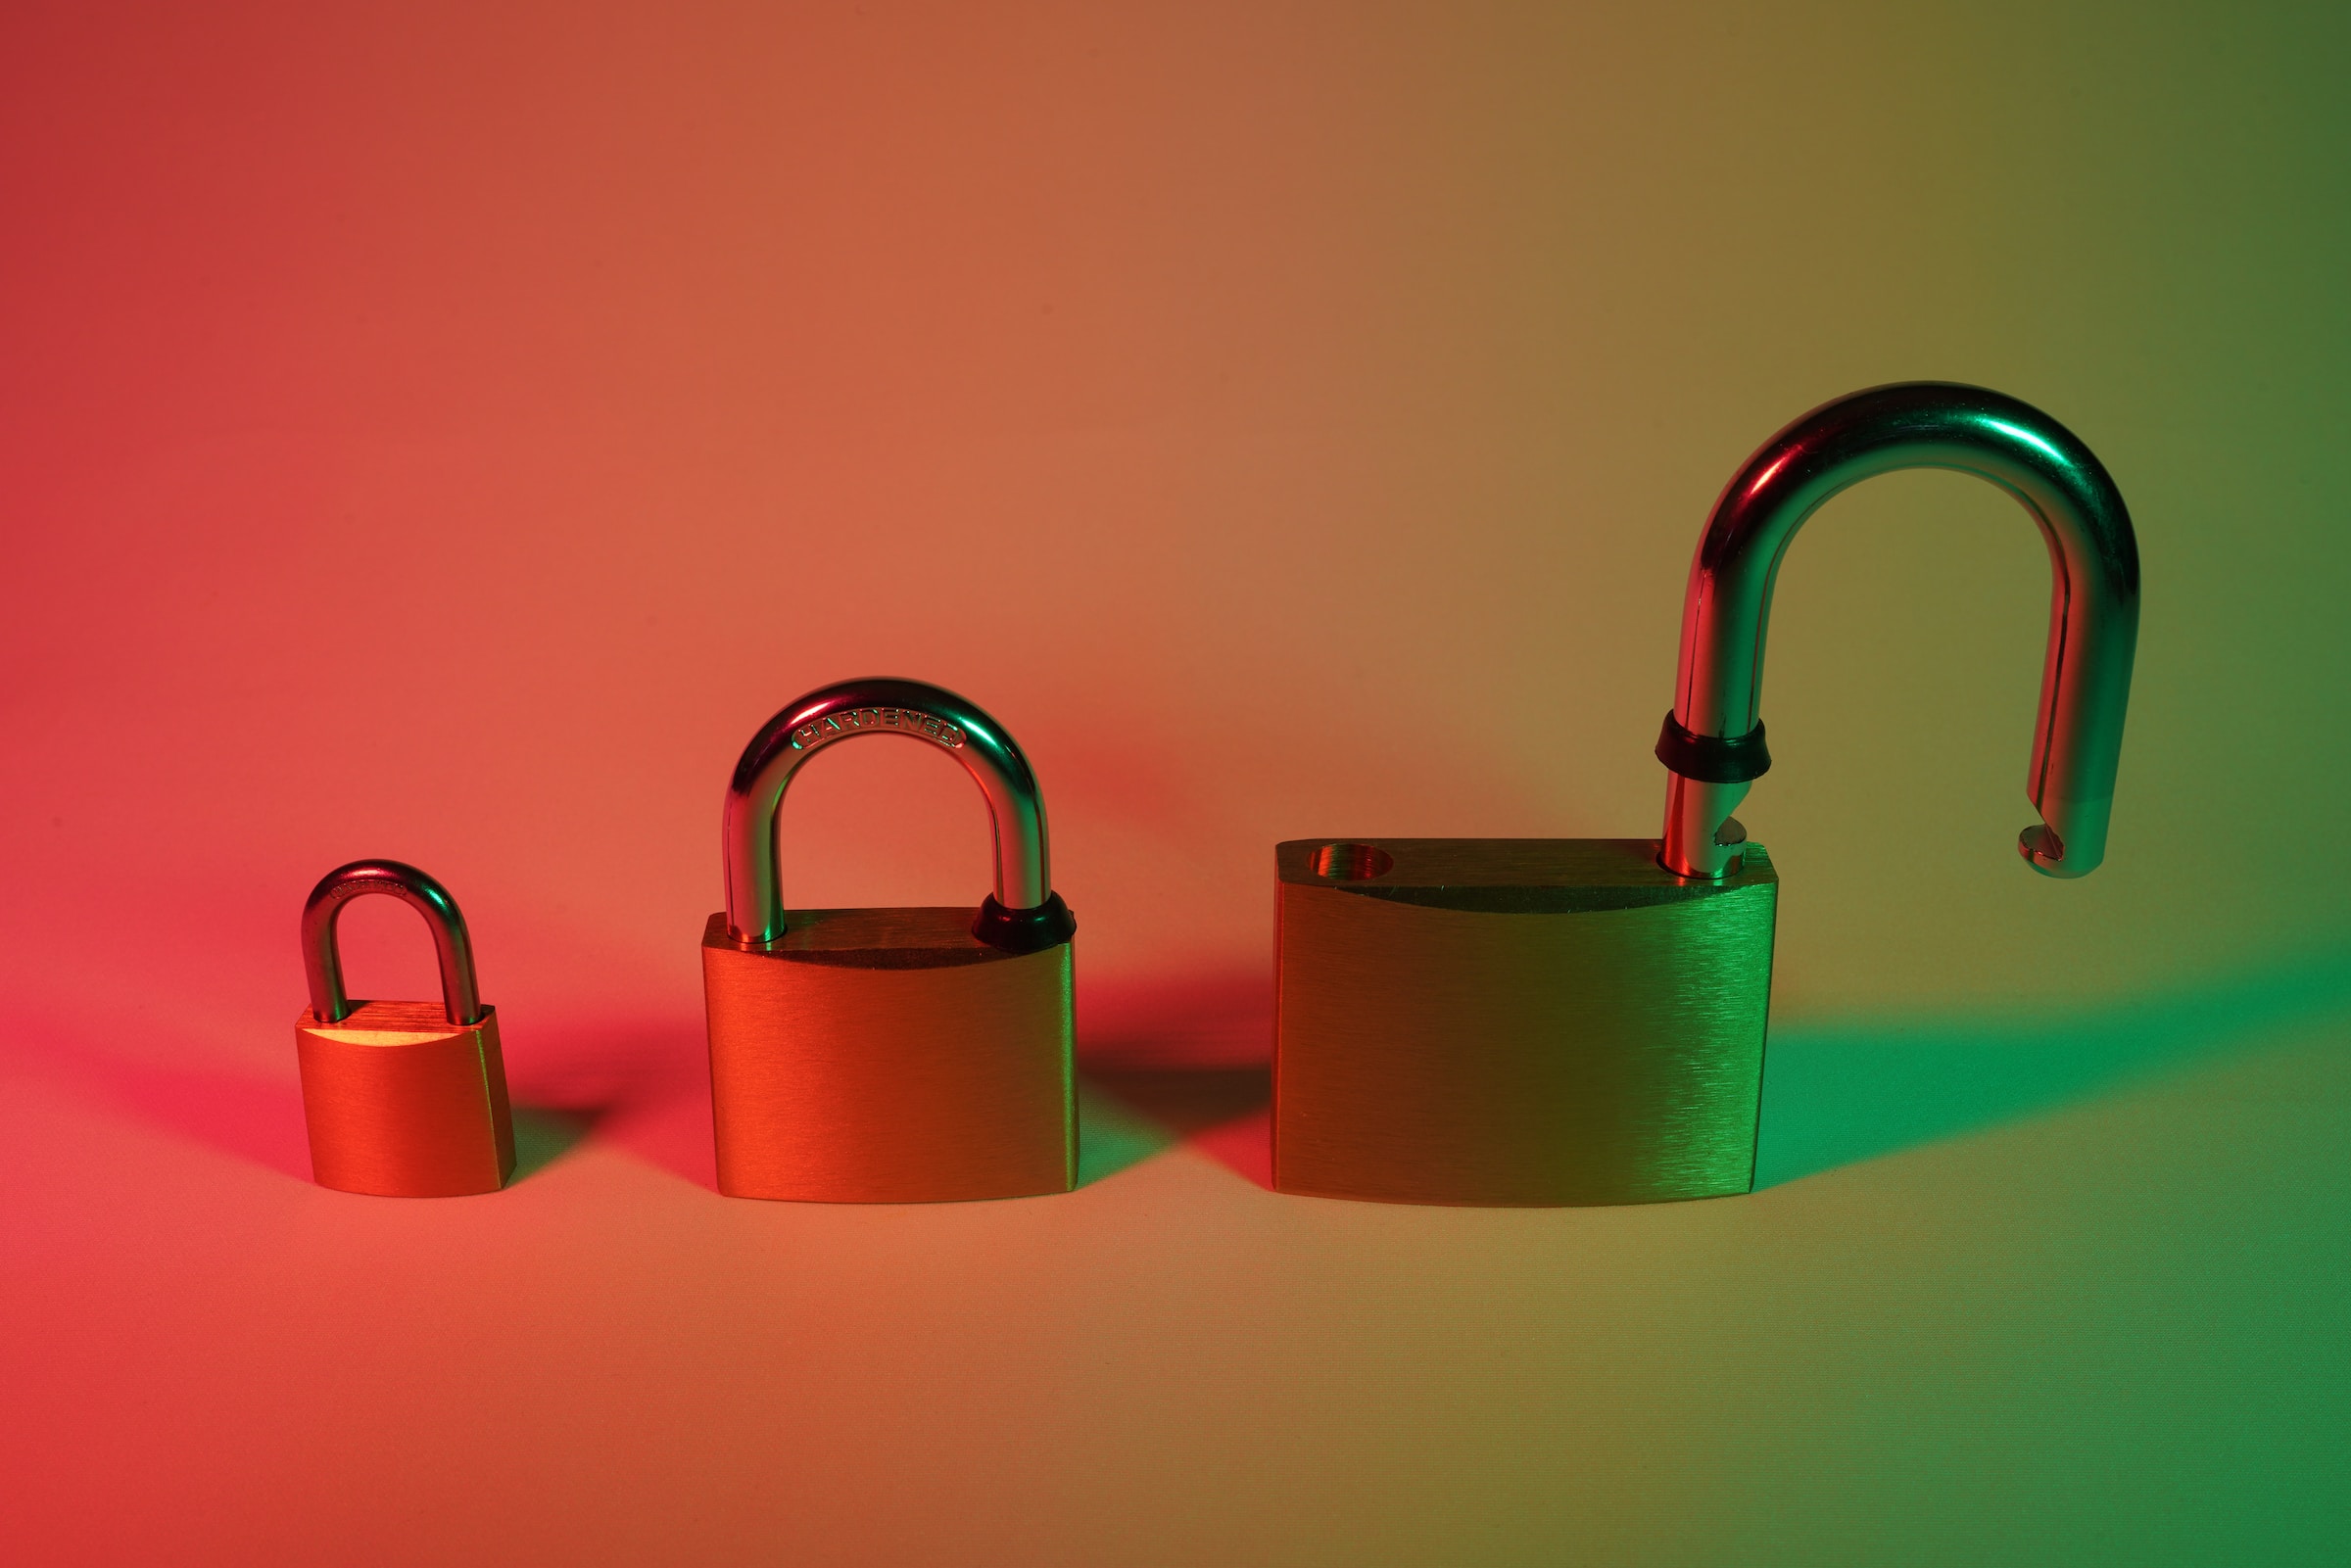 Three locks from big to small symbolizing a family using security best practices online